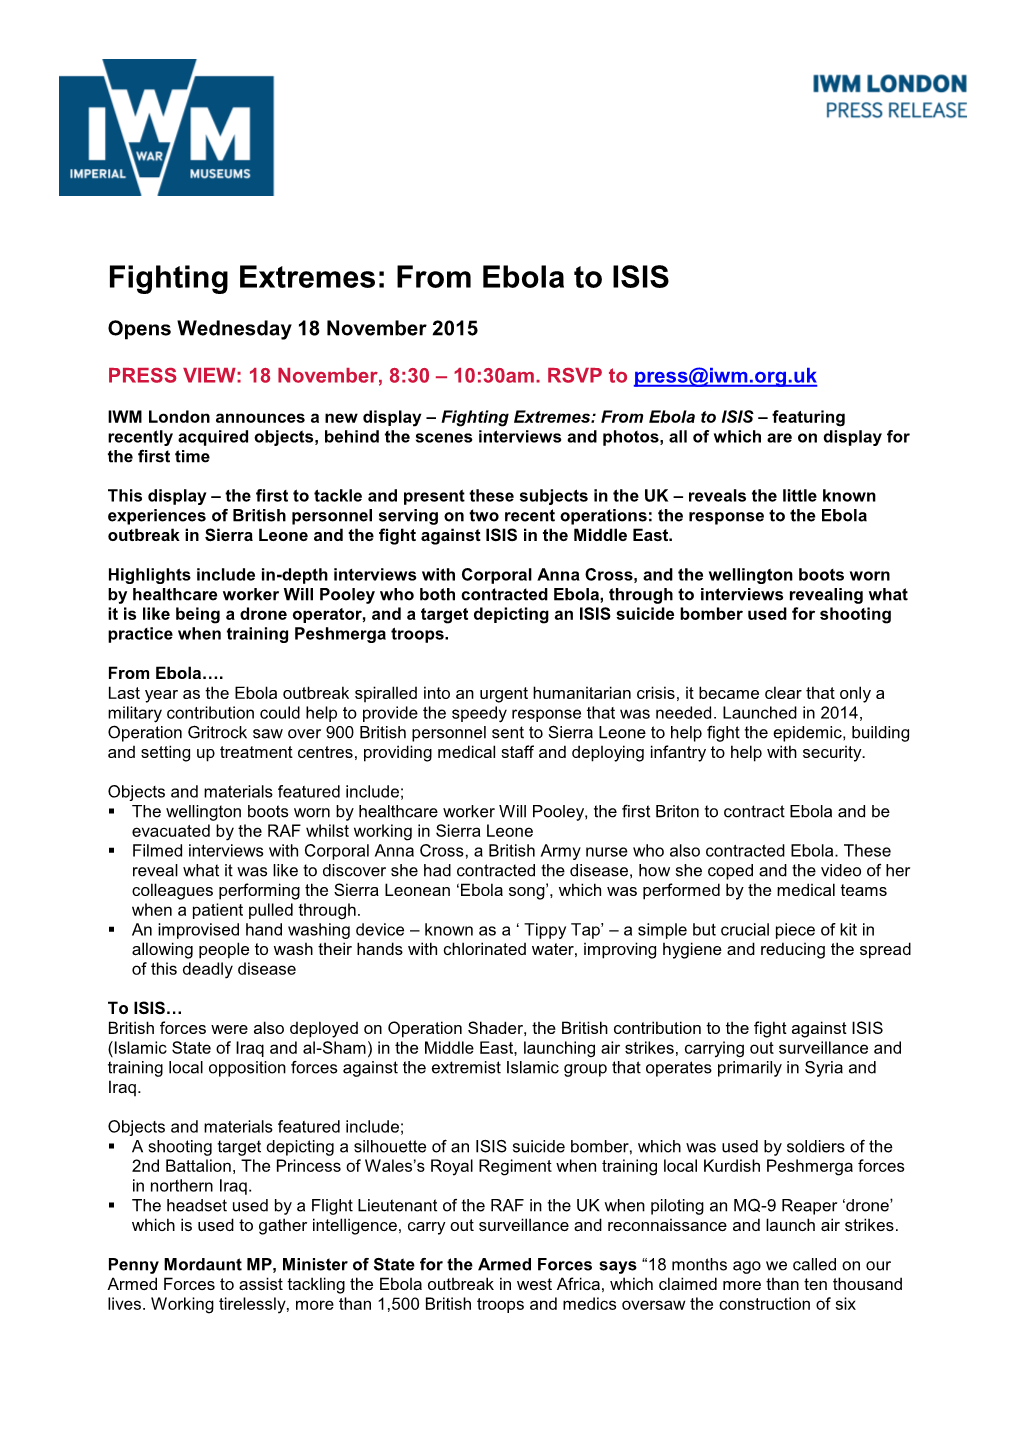 Fighting Extremes: from Ebola to ISIS